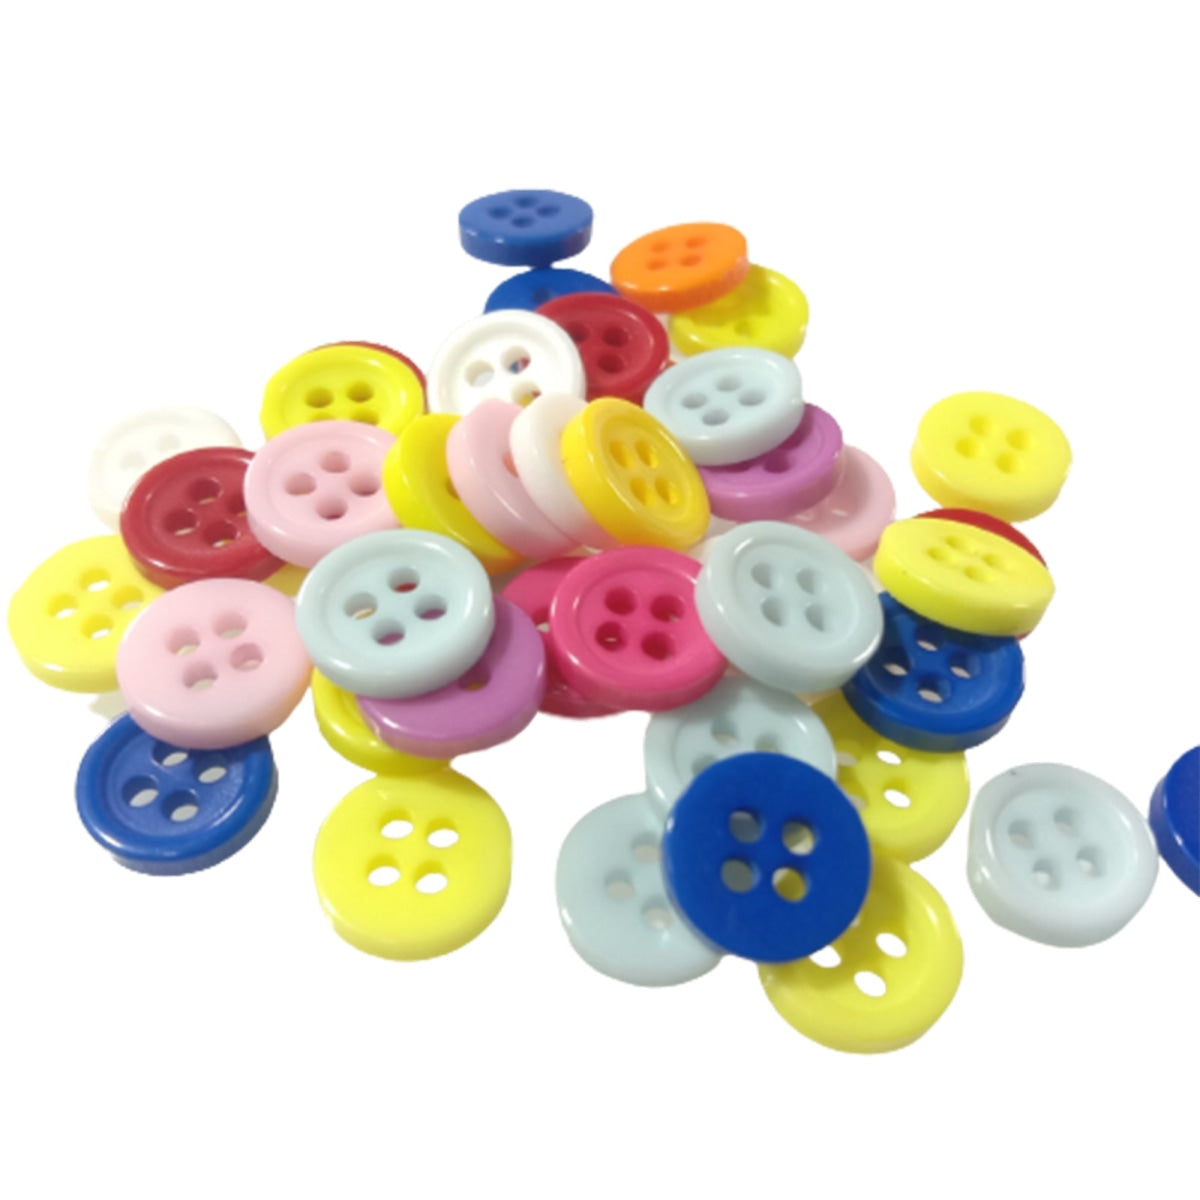 20X Mixed Coloured 9Mm 4-Hole Buttons Sewing For Apparel Kids Clothes Scrapbooking Clothing